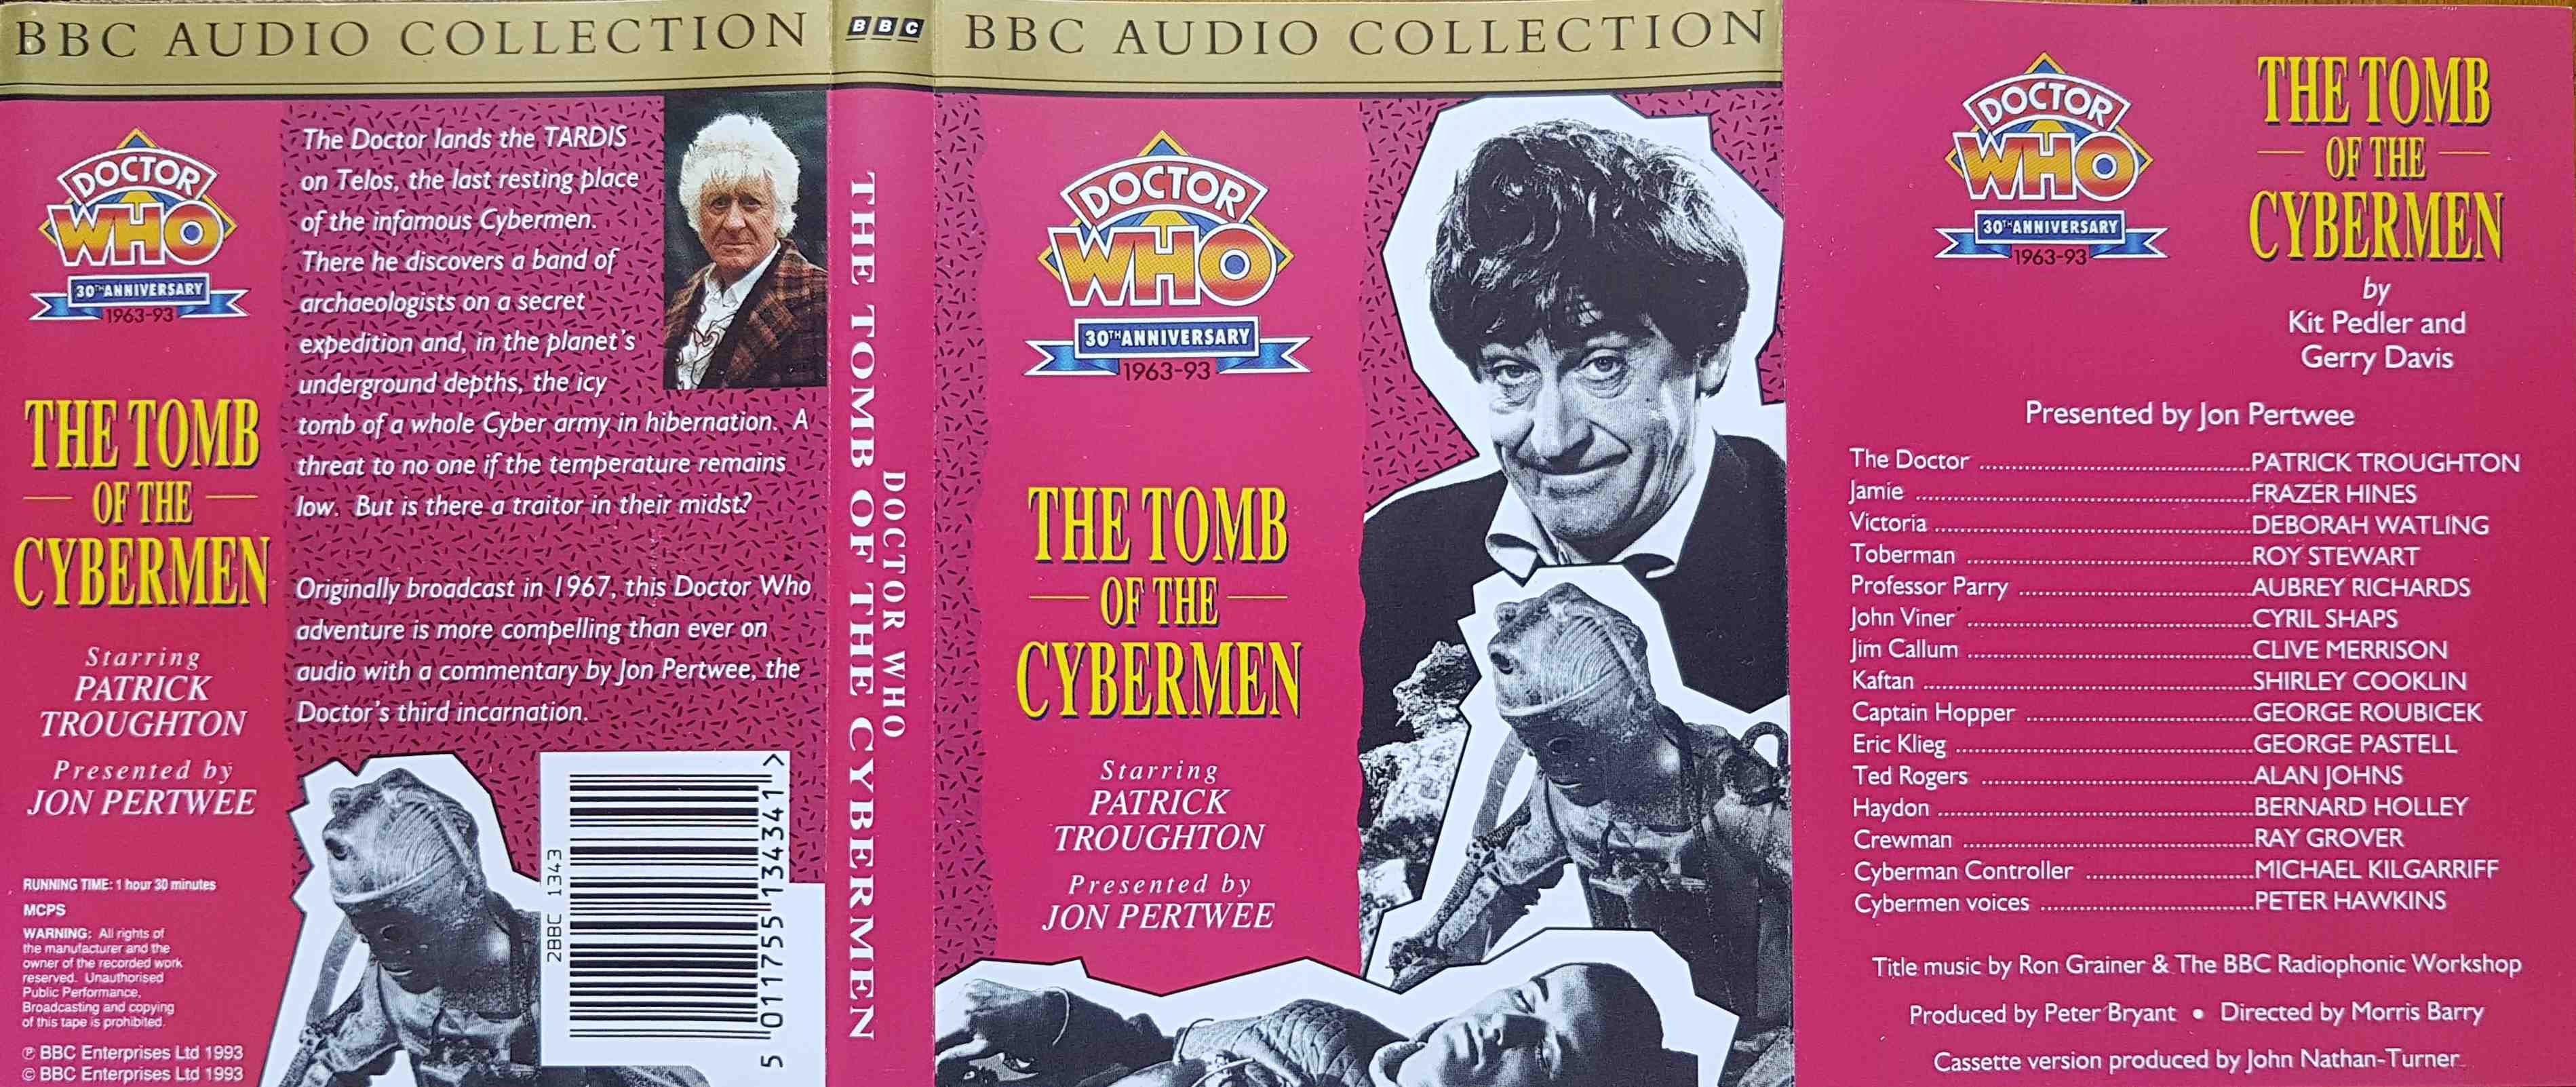 Picture of ZBBC 1343 Doctor Who - The tomb of the Cybermen by artist Kit Peddler / Gerry Davis from the BBC records and Tapes library